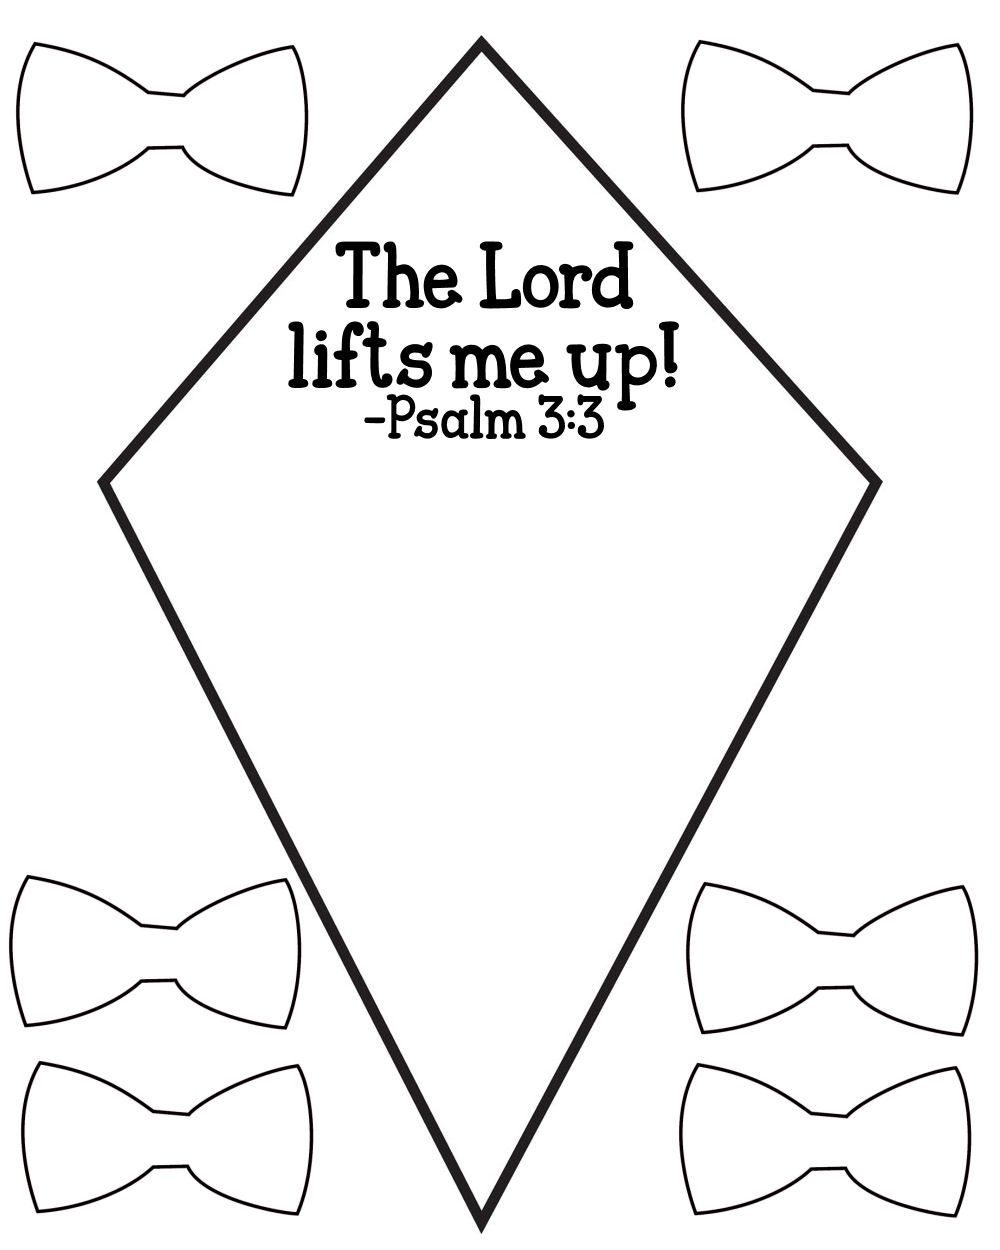 Free Psalm 3:3 Kids Bible Lesson Activity Printables - Free Printable Bible Crafts